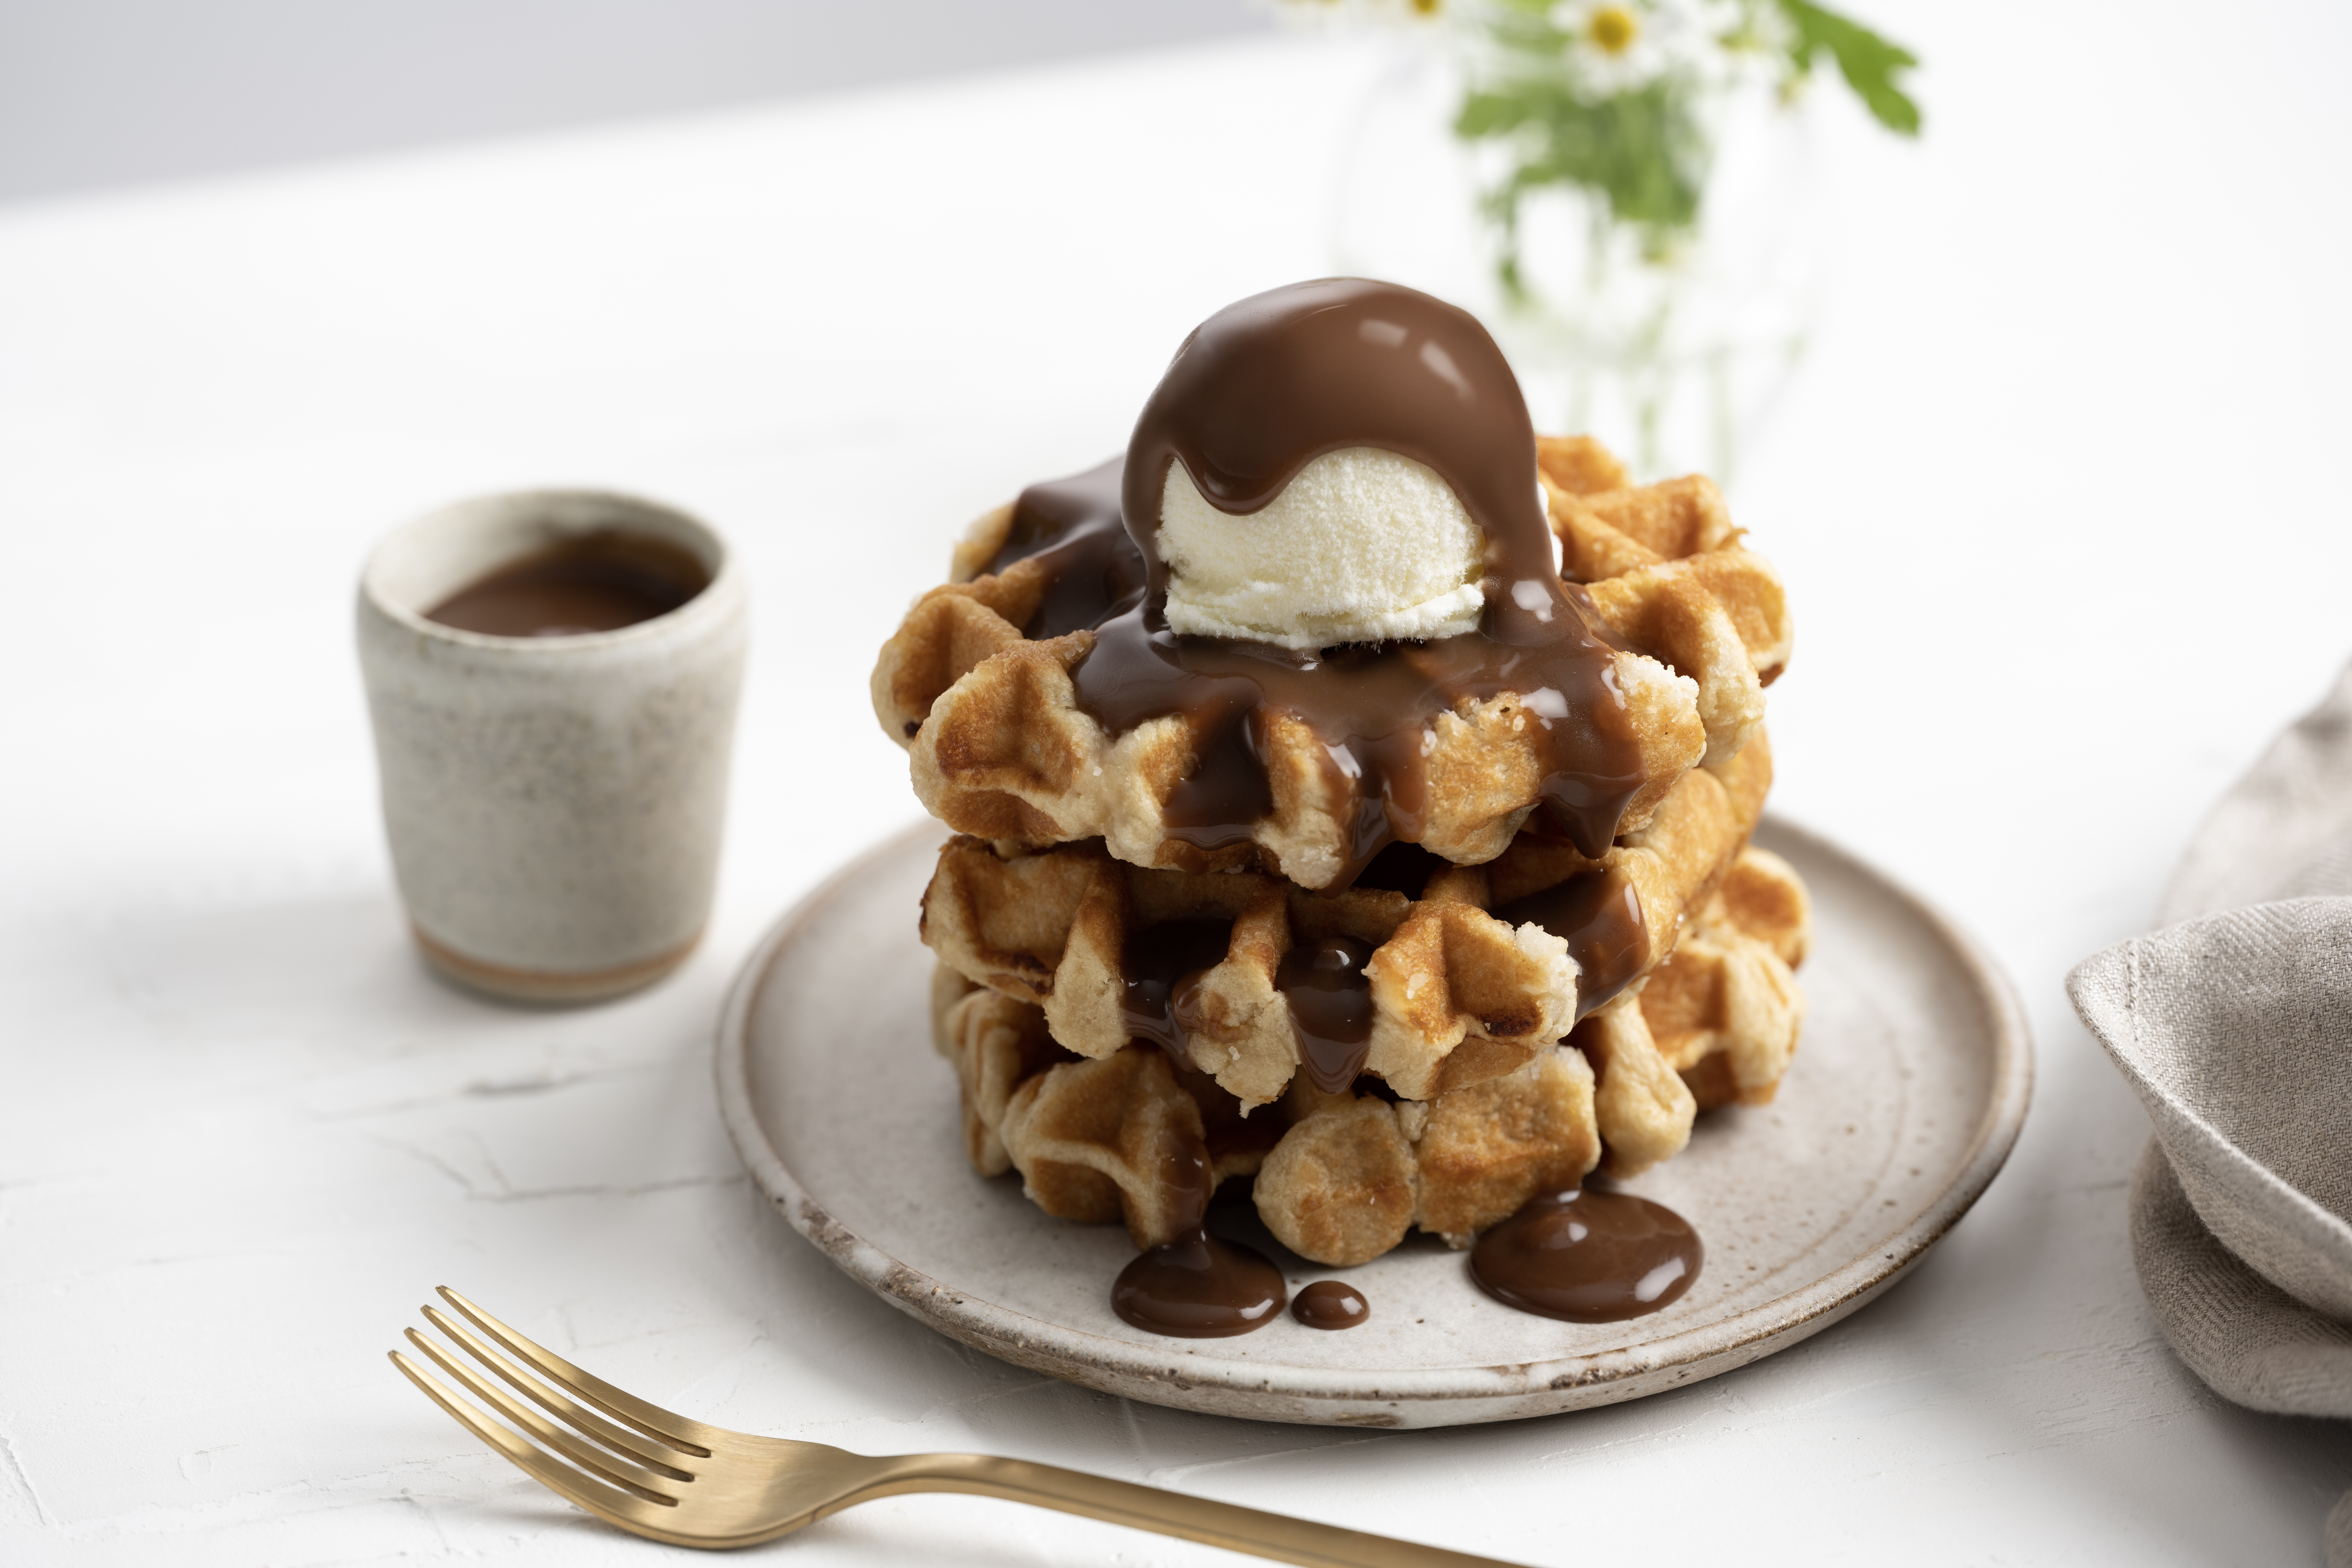 Chocolate Fudge Topping on Waffles with Ice Cream